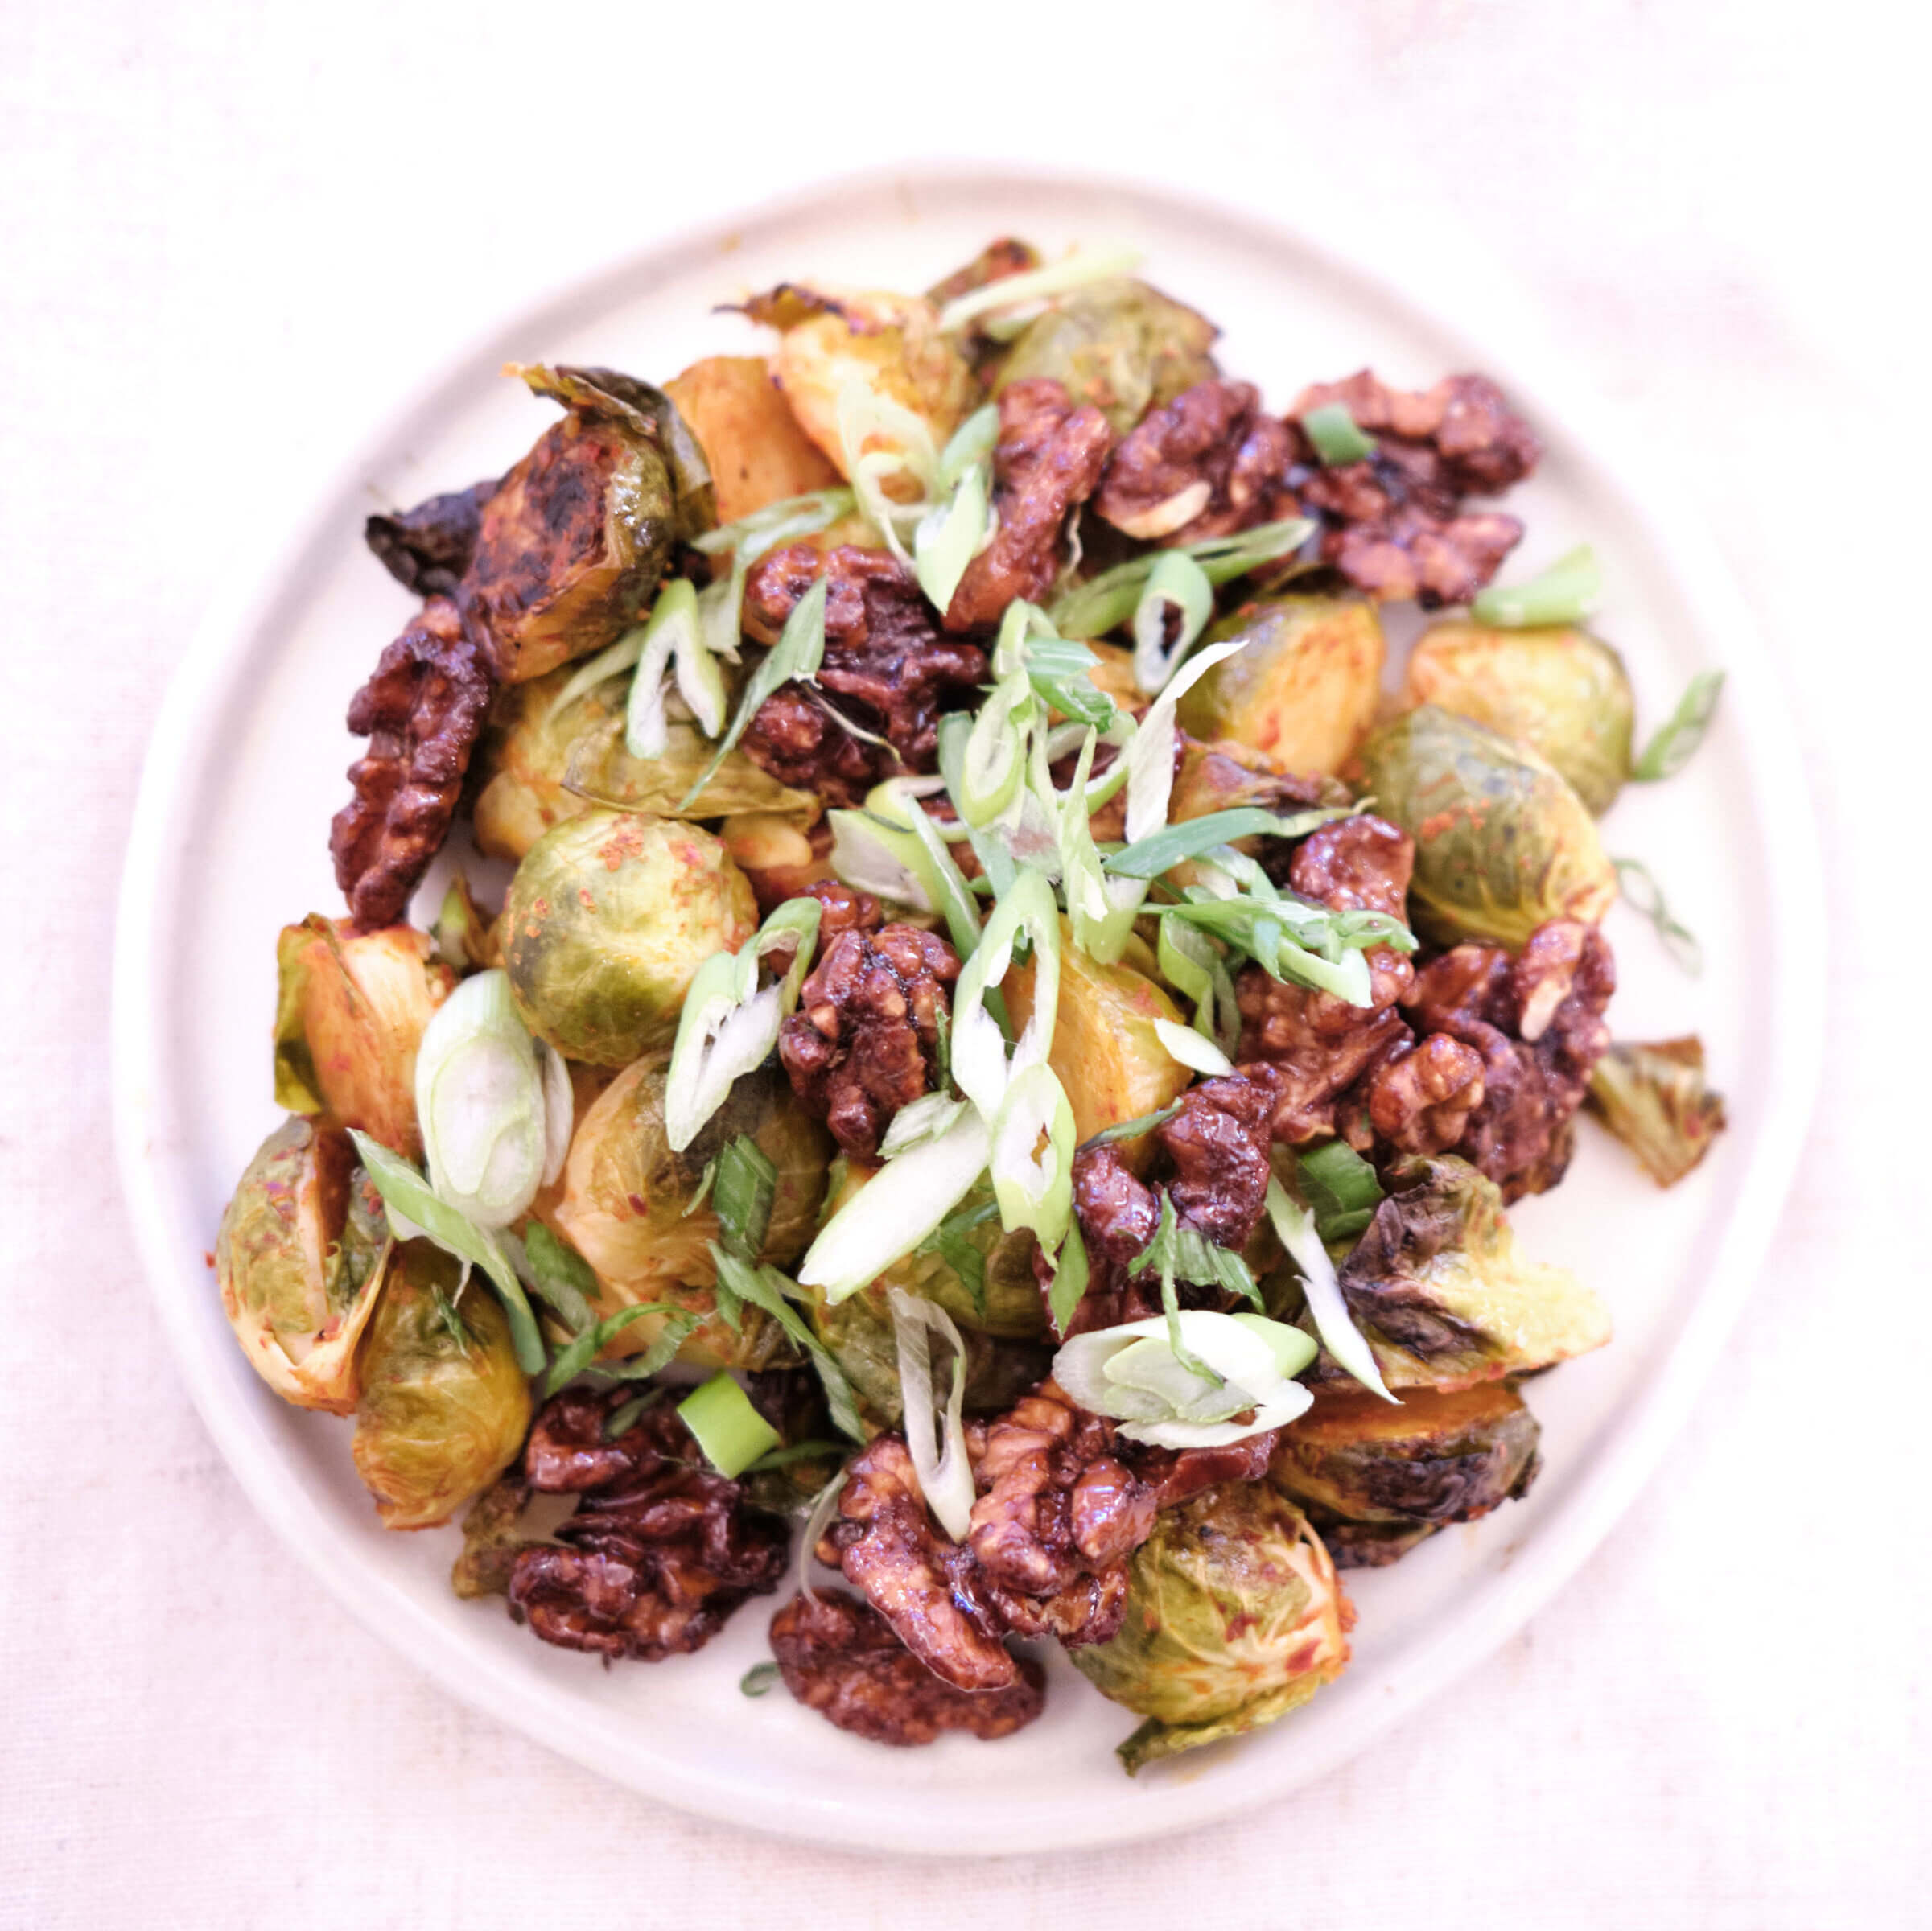 Plate of roasted brussels sprouts with kimchi paste, Acacia Honey, scallions, and Caramelized Walnuts